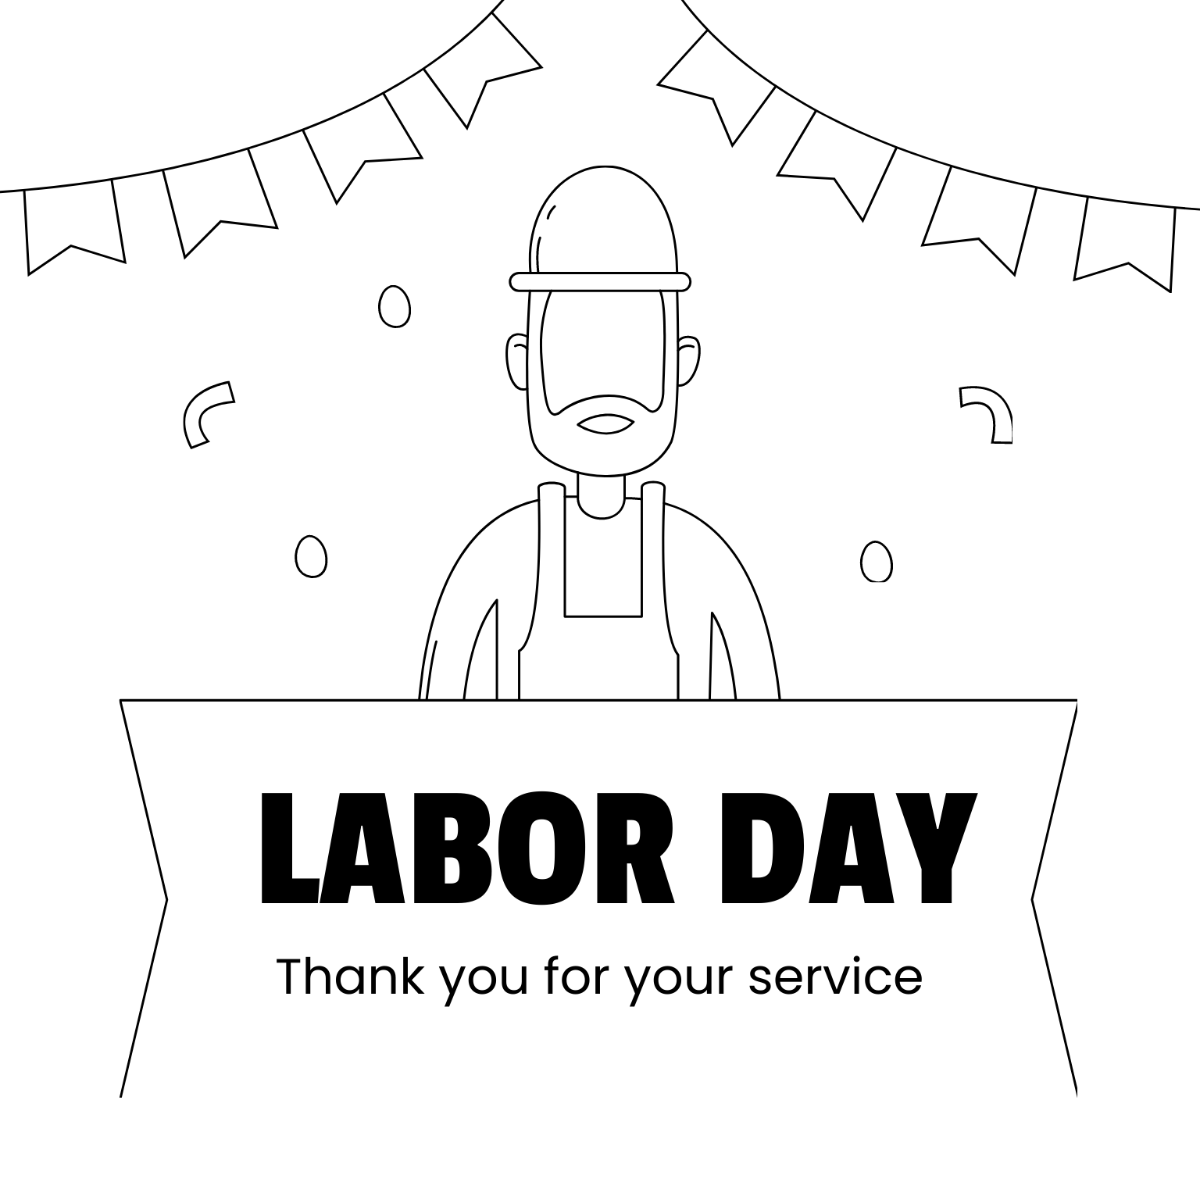 Labor Day Message Drawing Template